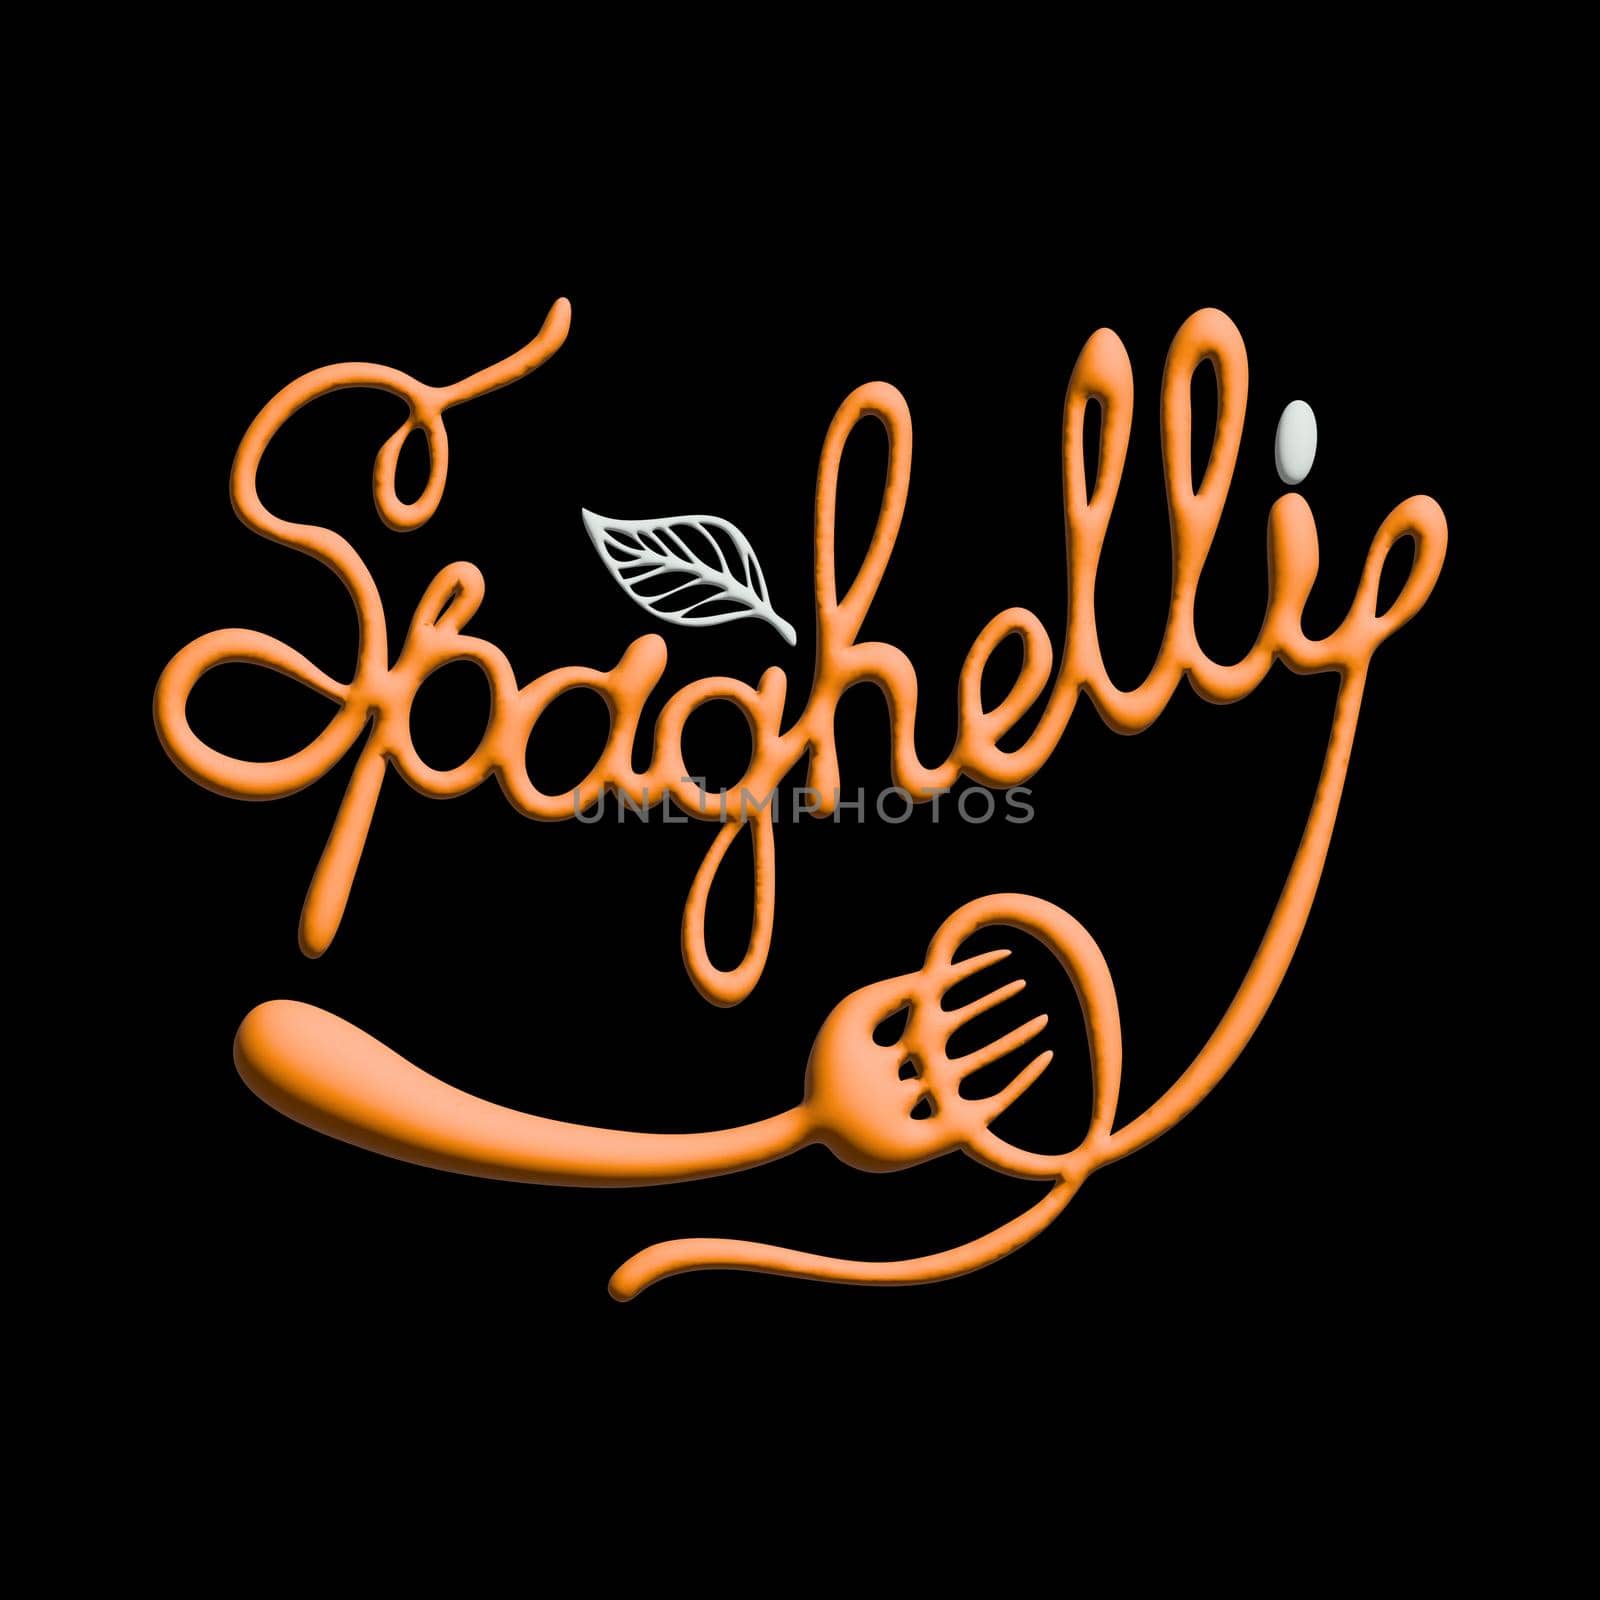 Text stylized written spaghetti. Stylish design for a brand, label or advertisement - 3D image by BEMPhoto